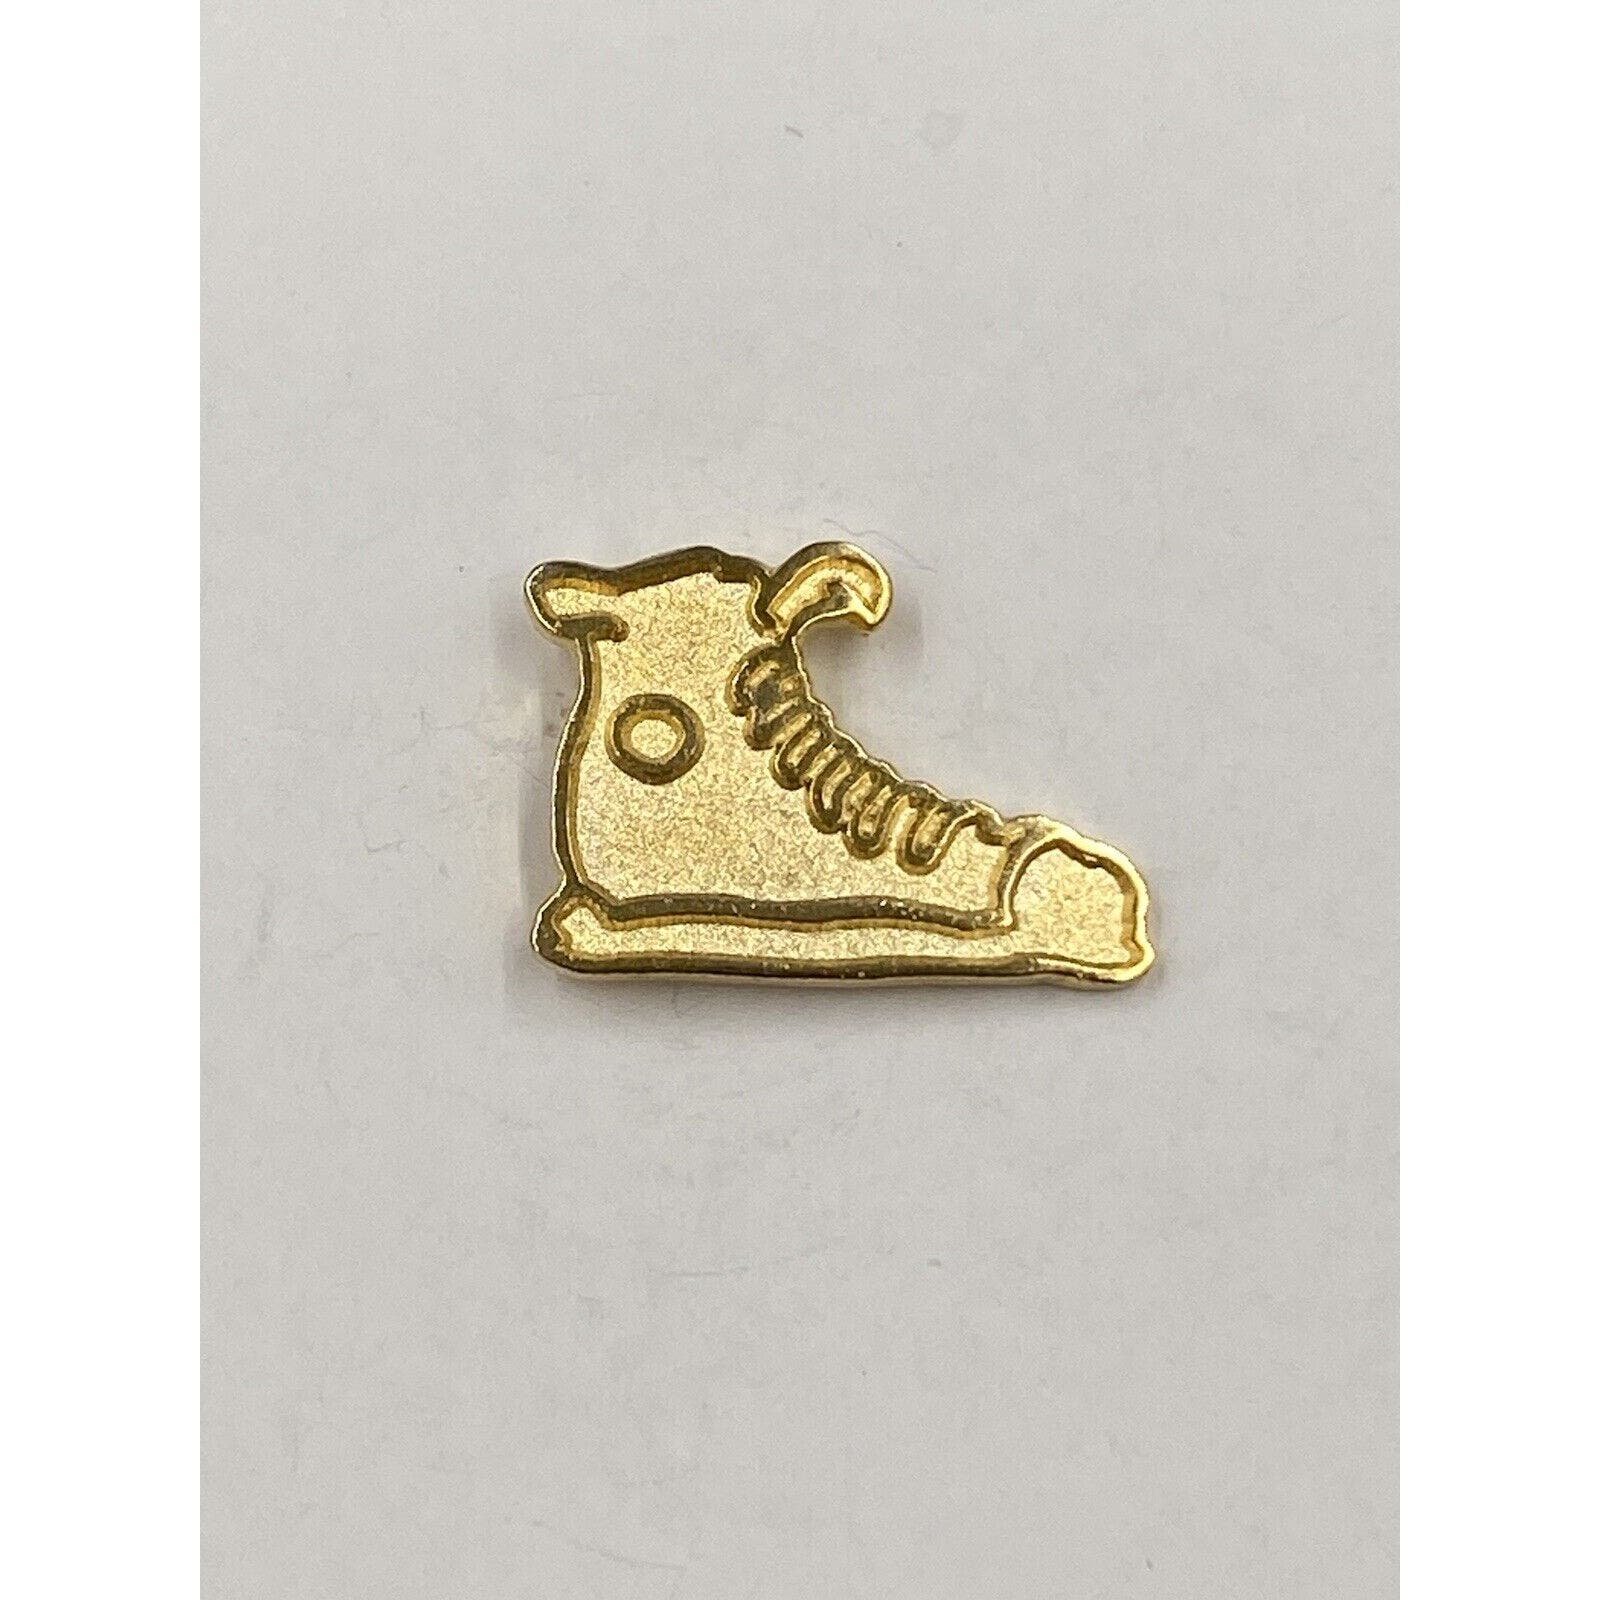 High Top Sneaker Athletic Tennis Shoe Gold Colored Lapel Hat Pin 3UAABMLRM